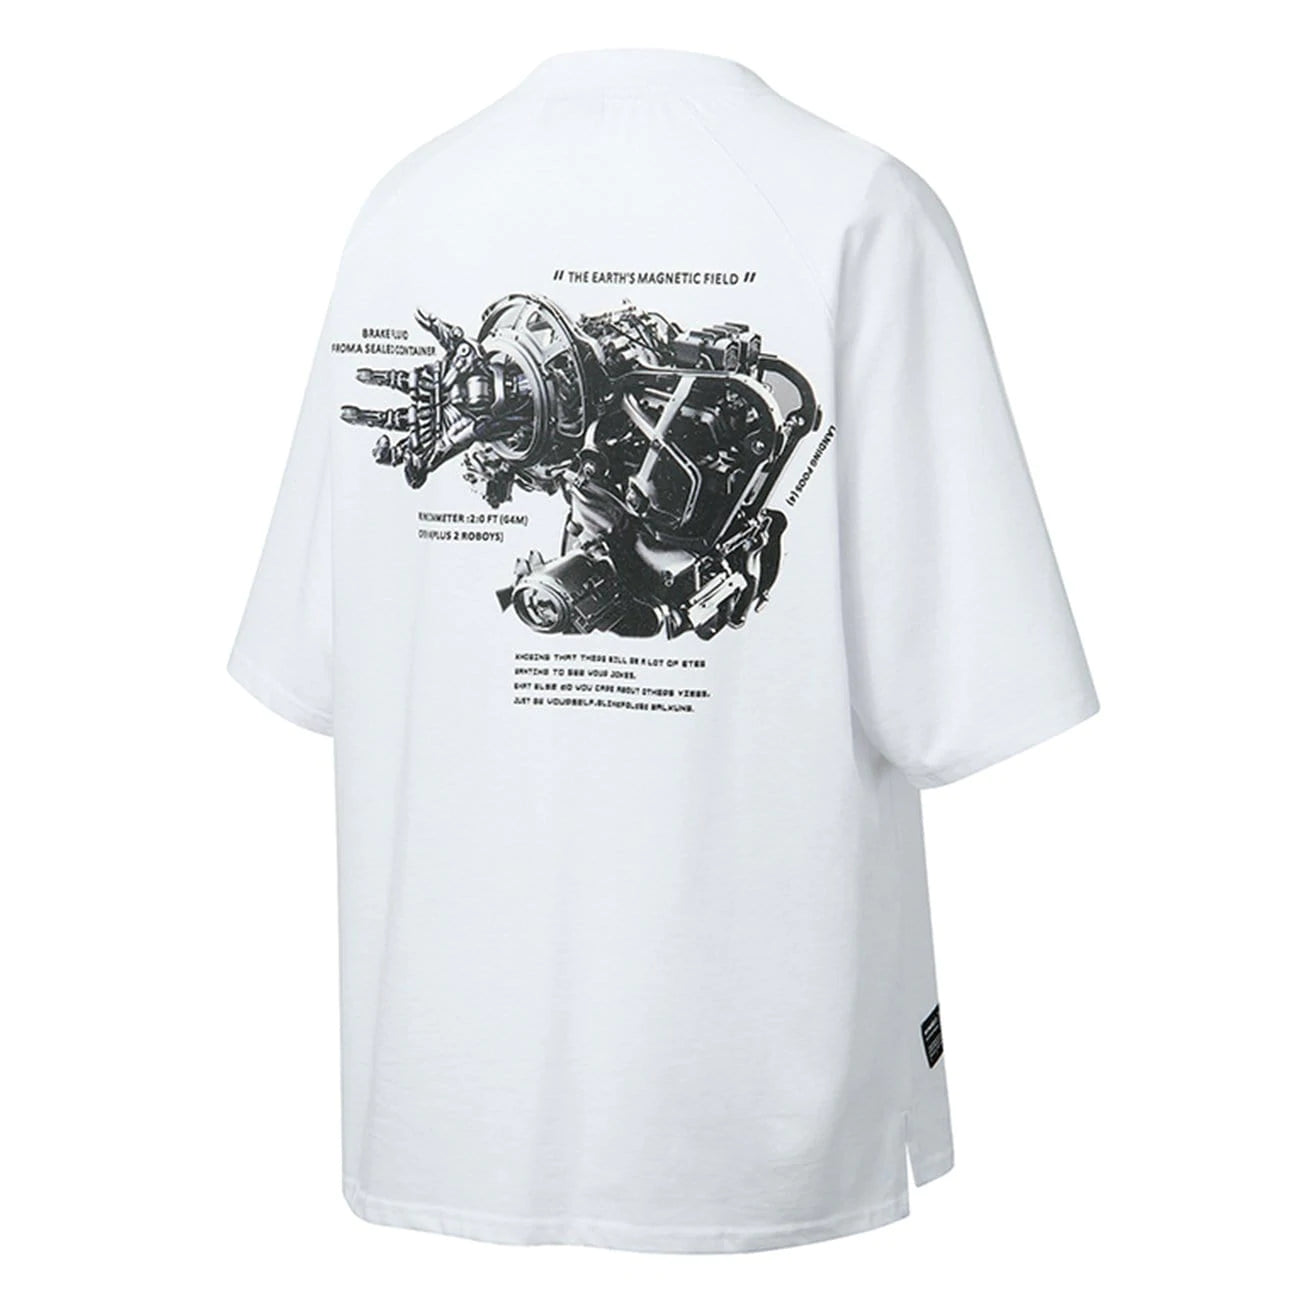 WLS Three-dimensional Armed Mech Graphic Tee